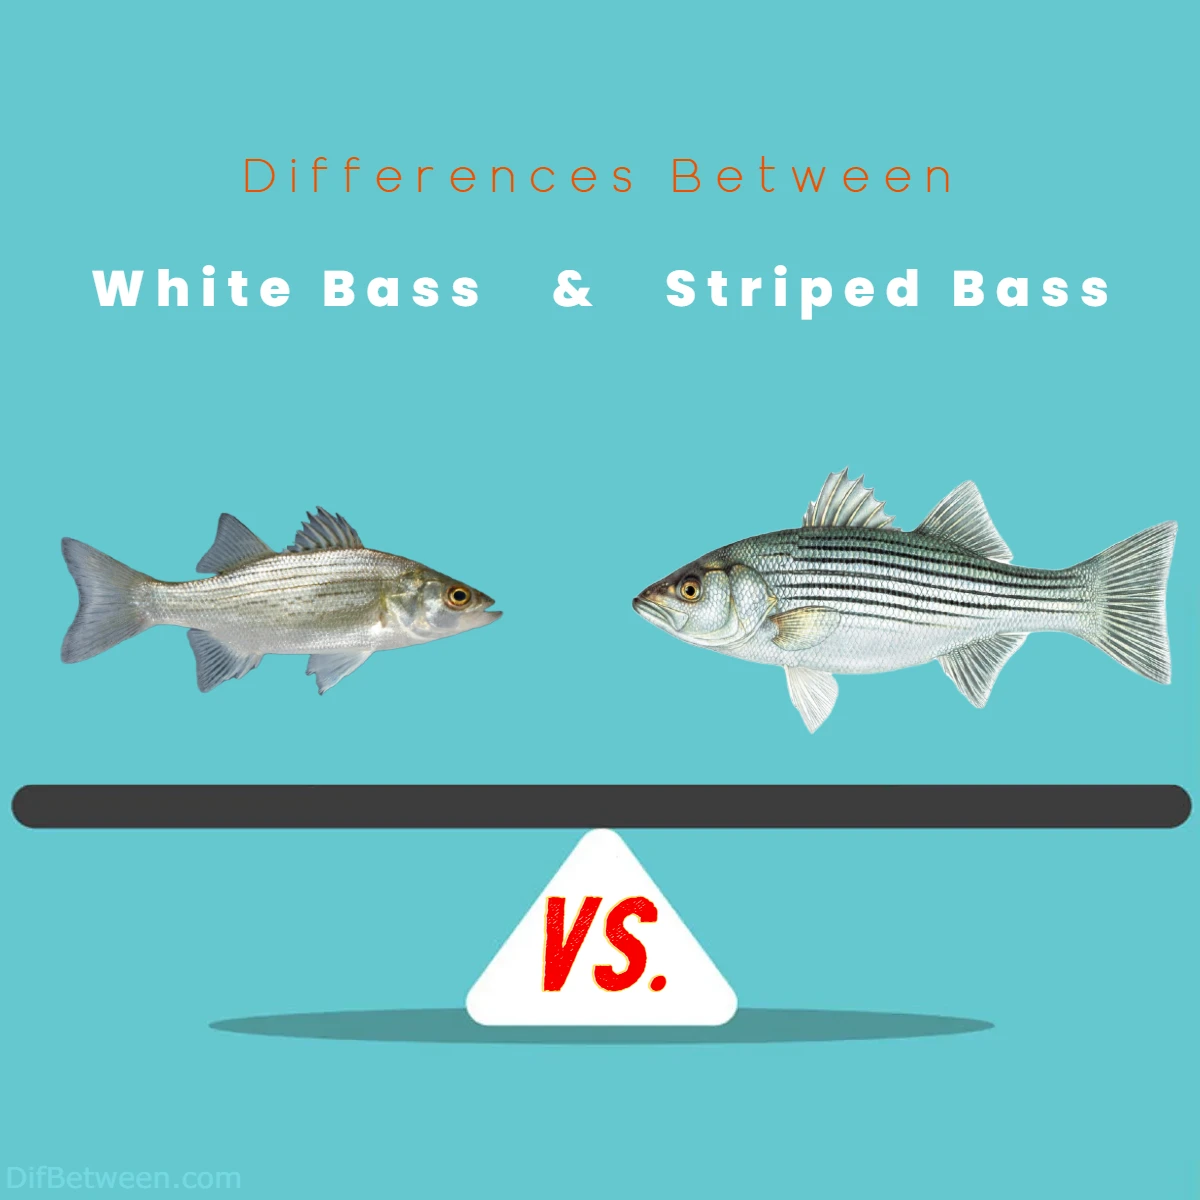 Differences Between White Bass vs Striped Bass